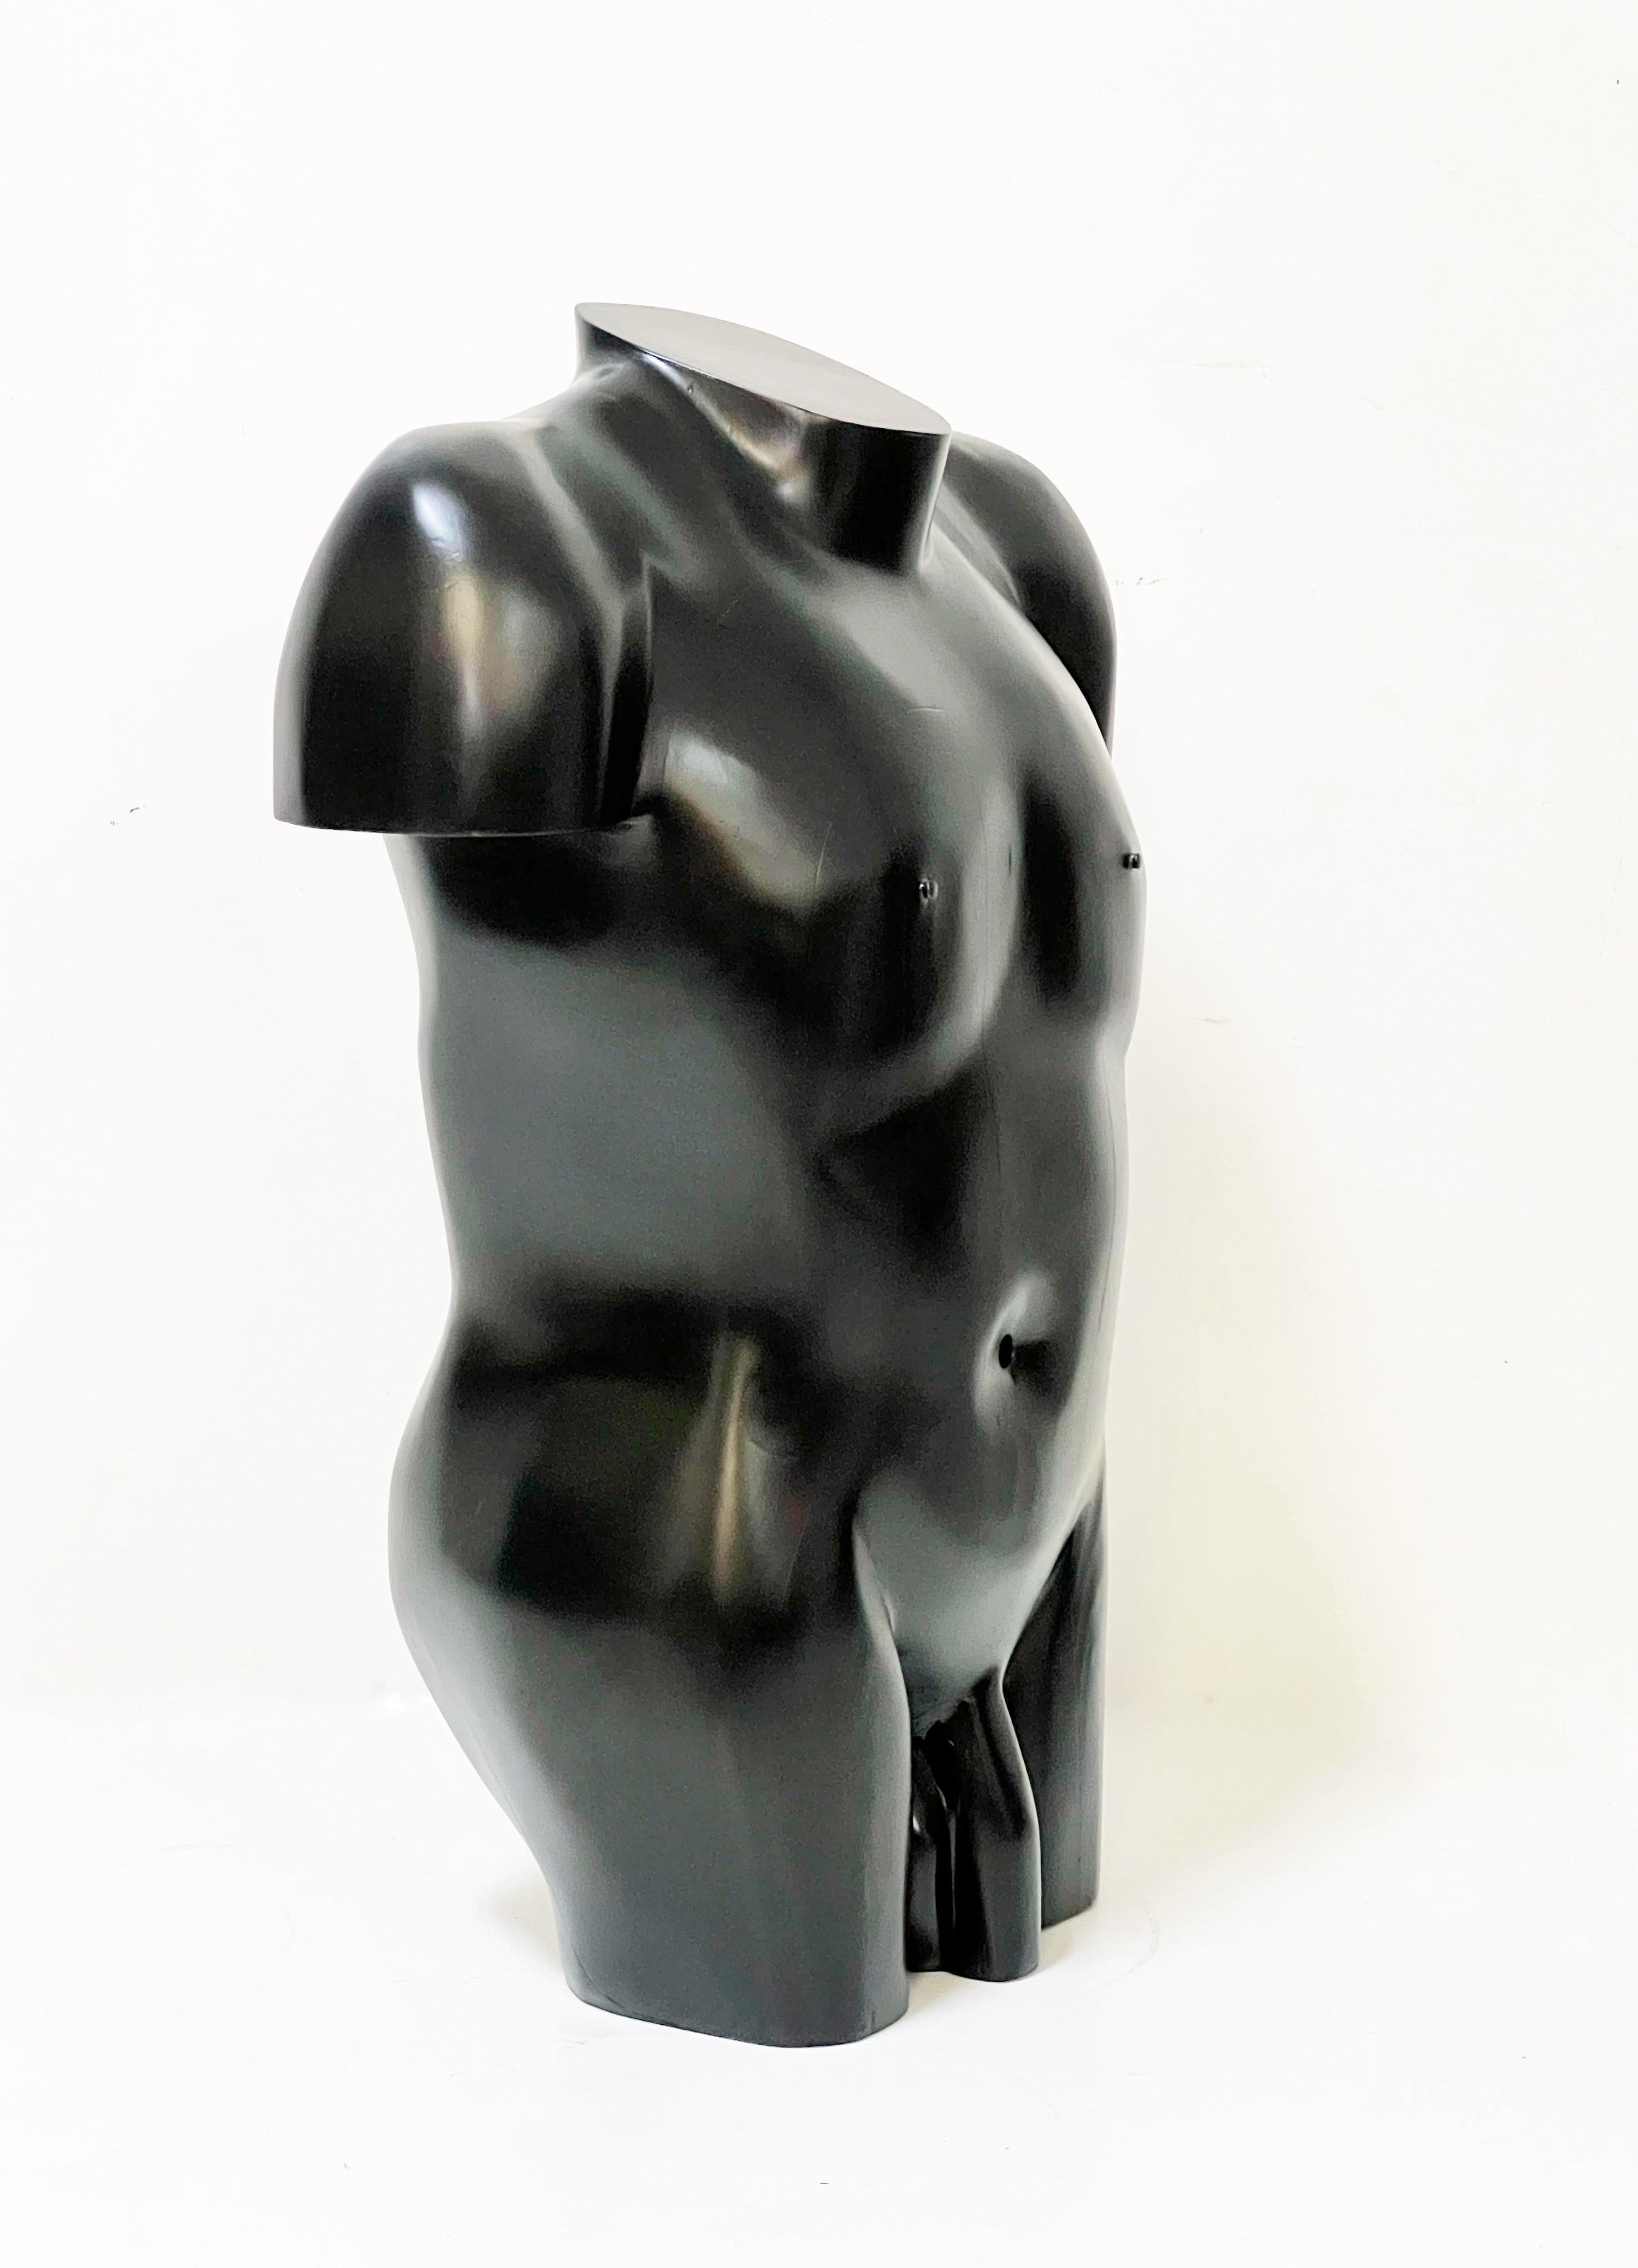 A lifesize sculpture of a nude. Done in a modern stylized manner. Lucite base included, looks great with or without it. 